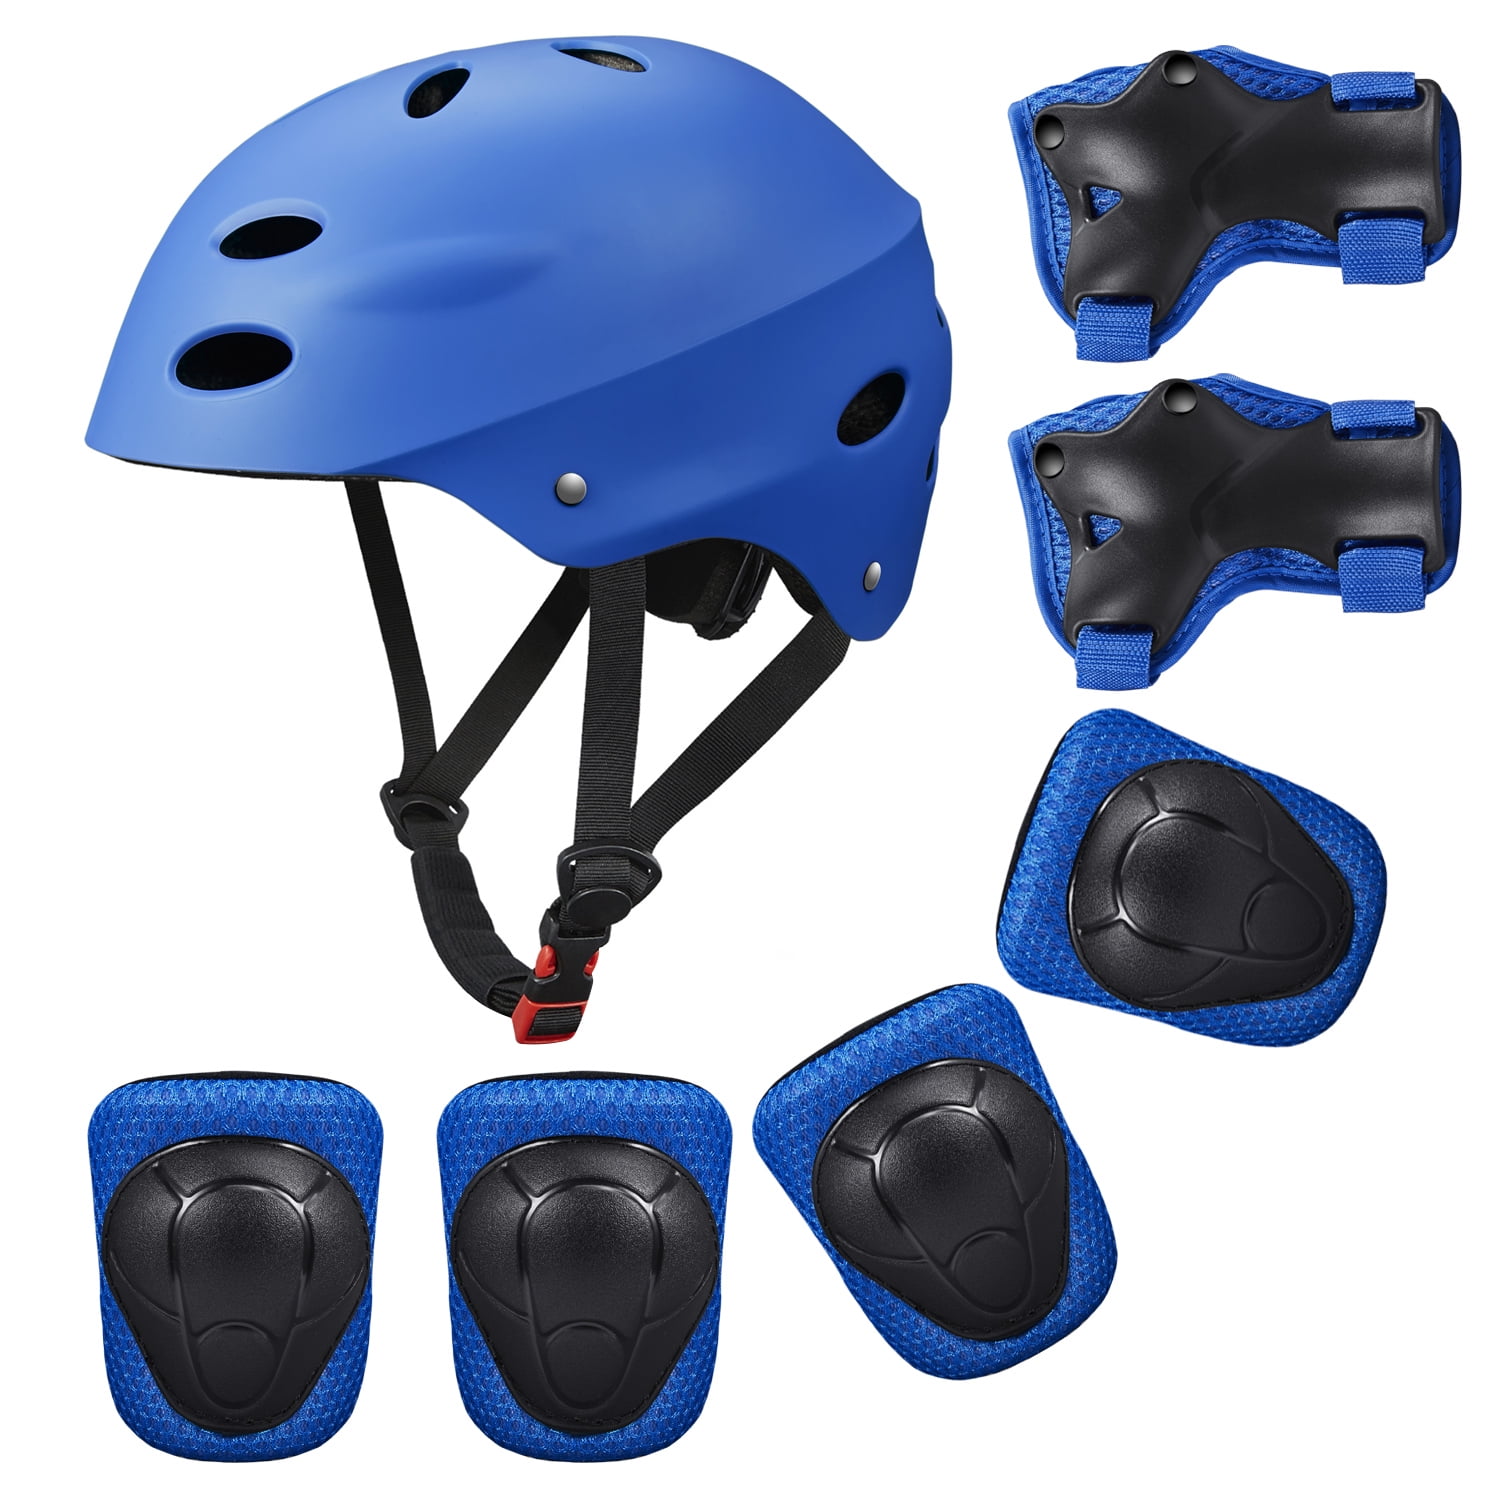 Kids Bike Helmet Knee Elbow Wrist Pads 3-8 Years Toddler to Youth for Bike Skateboarding Roller Blading Scooter Riding Bicycling Roller Skating and More 